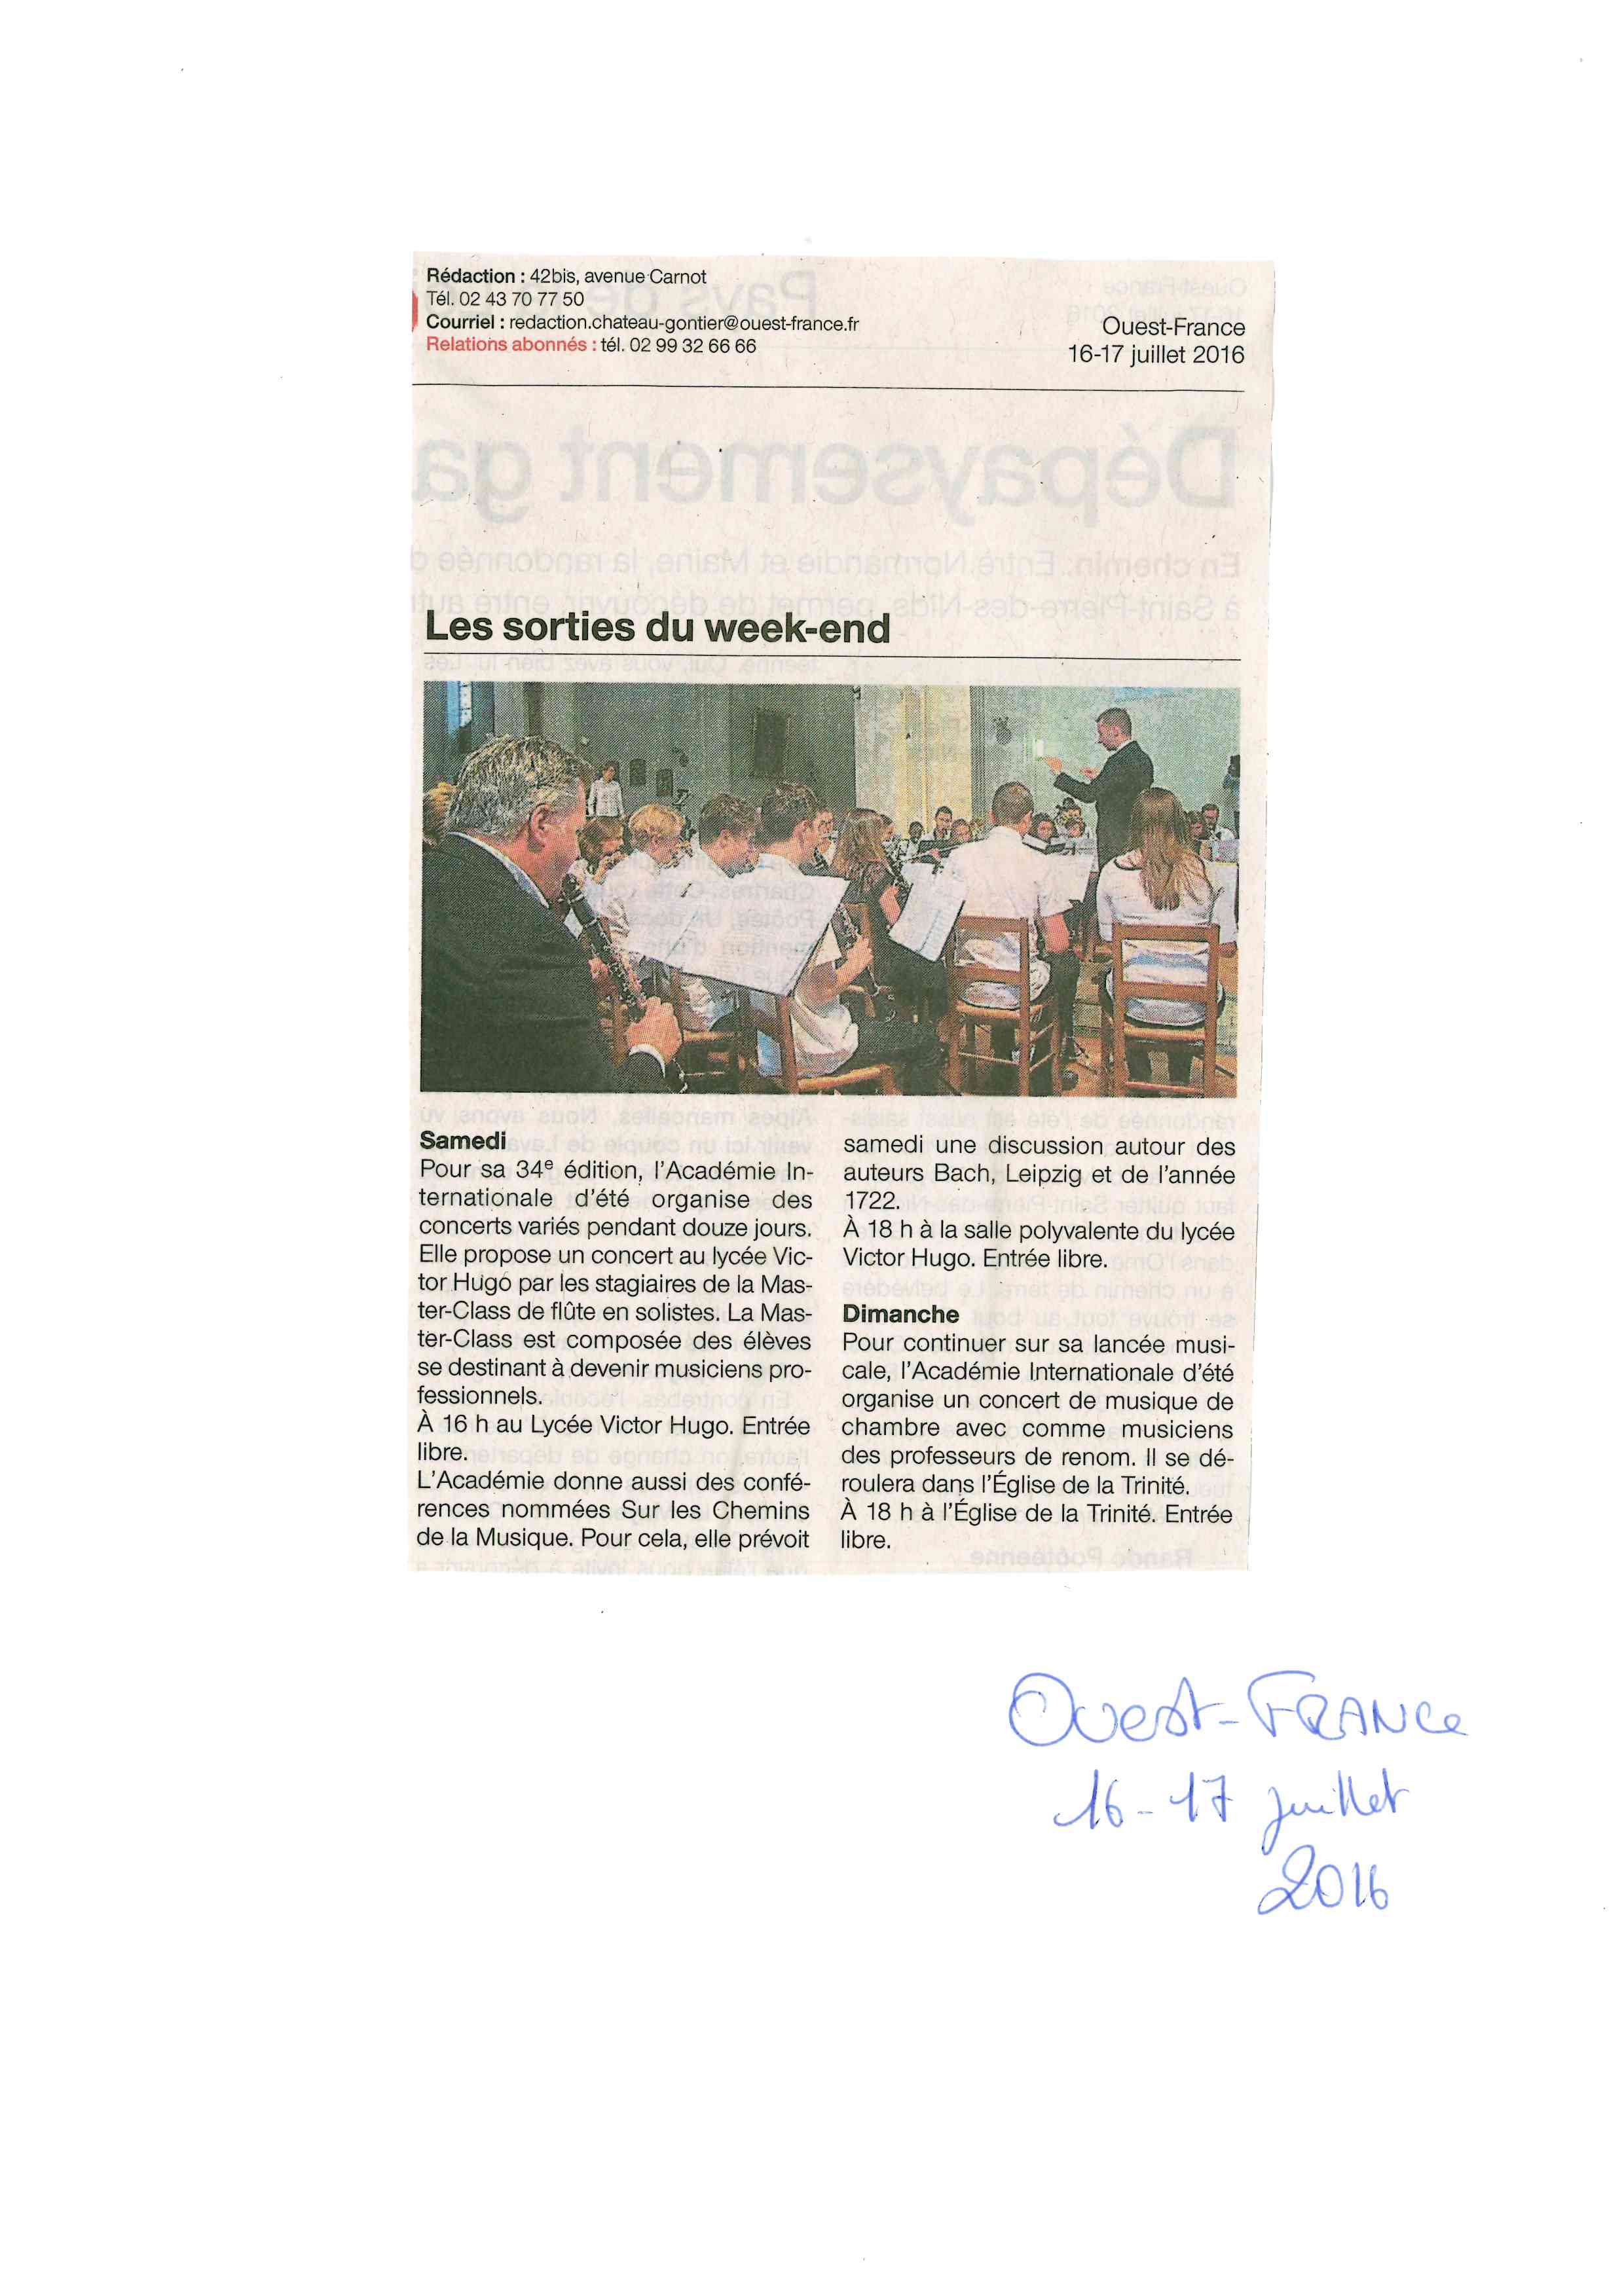 16072016-ouest france